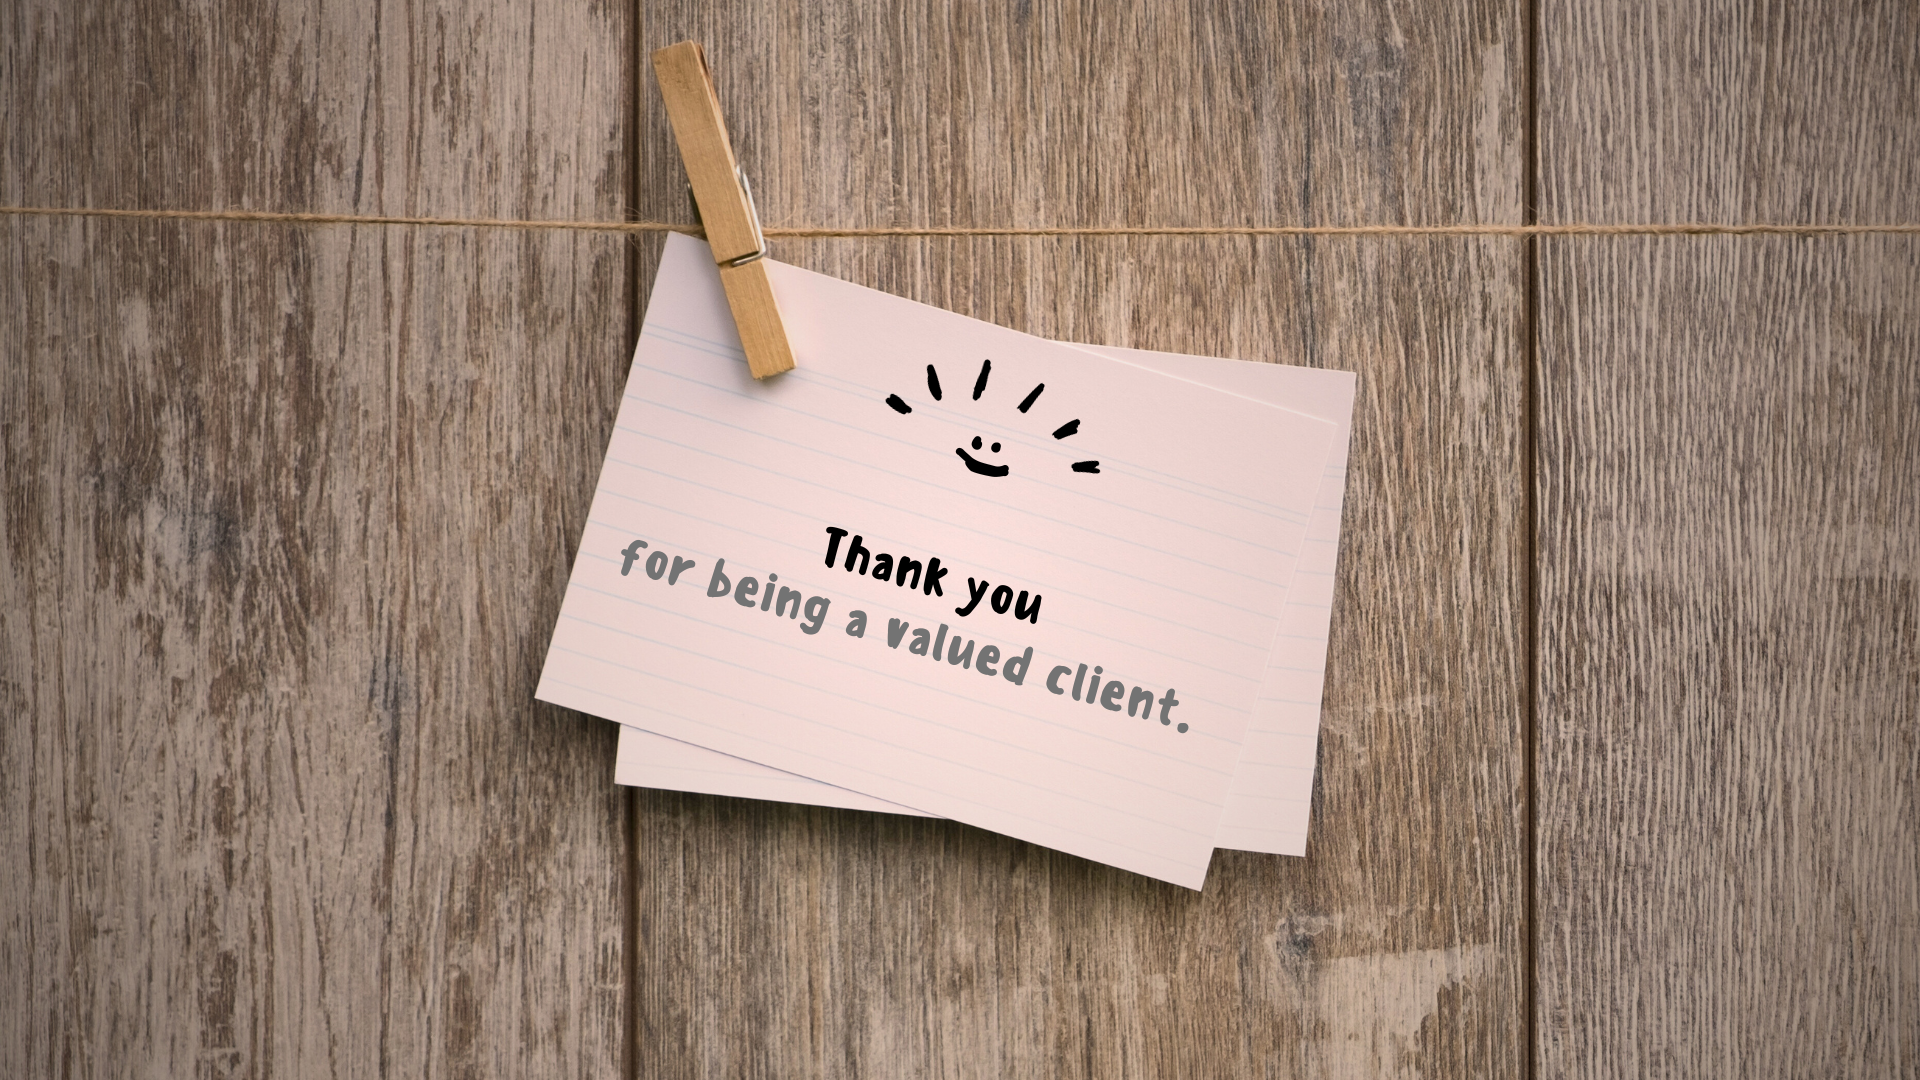 7 Tips to Win Over Clients with Year-End Messages